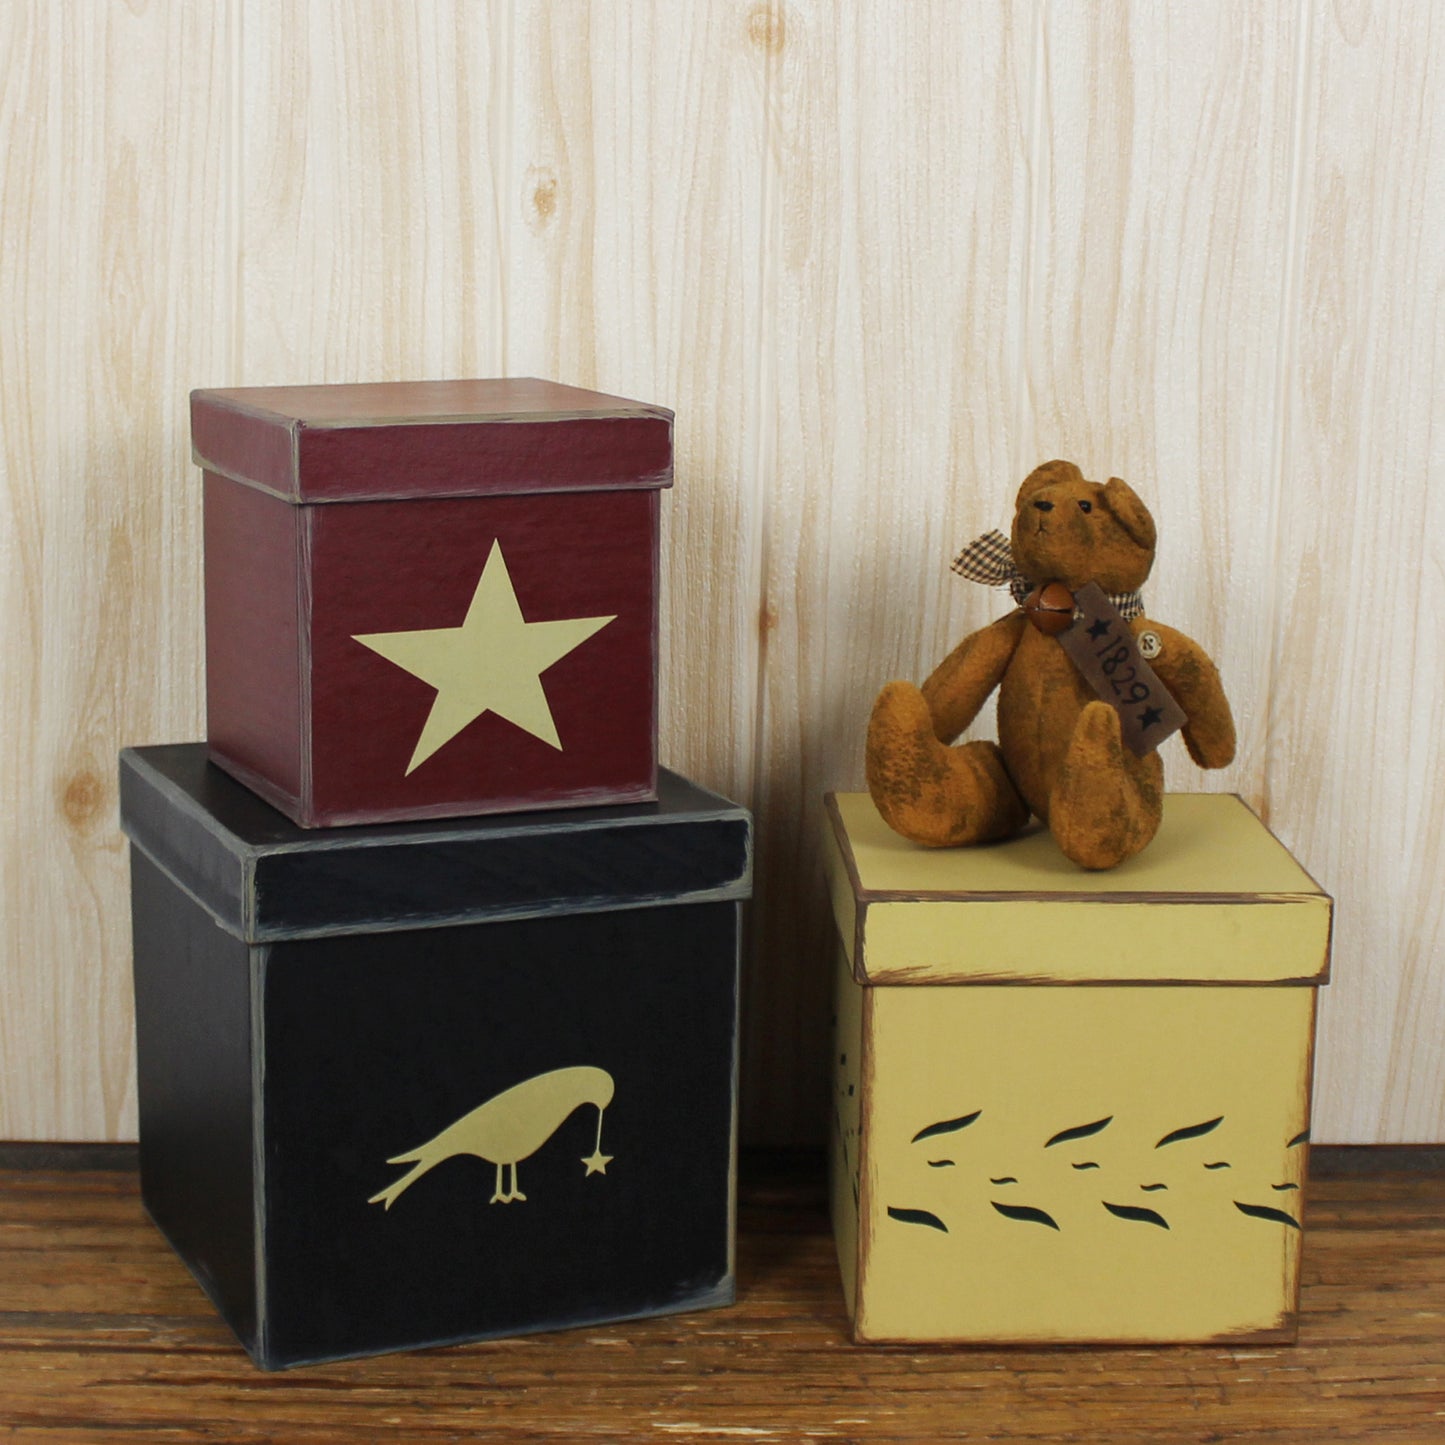 CVHOMEDECO. Primitive Country Cubic Star Crow Cardboard Nesting Boxes, 8/7/6 Inch. Set of 3.